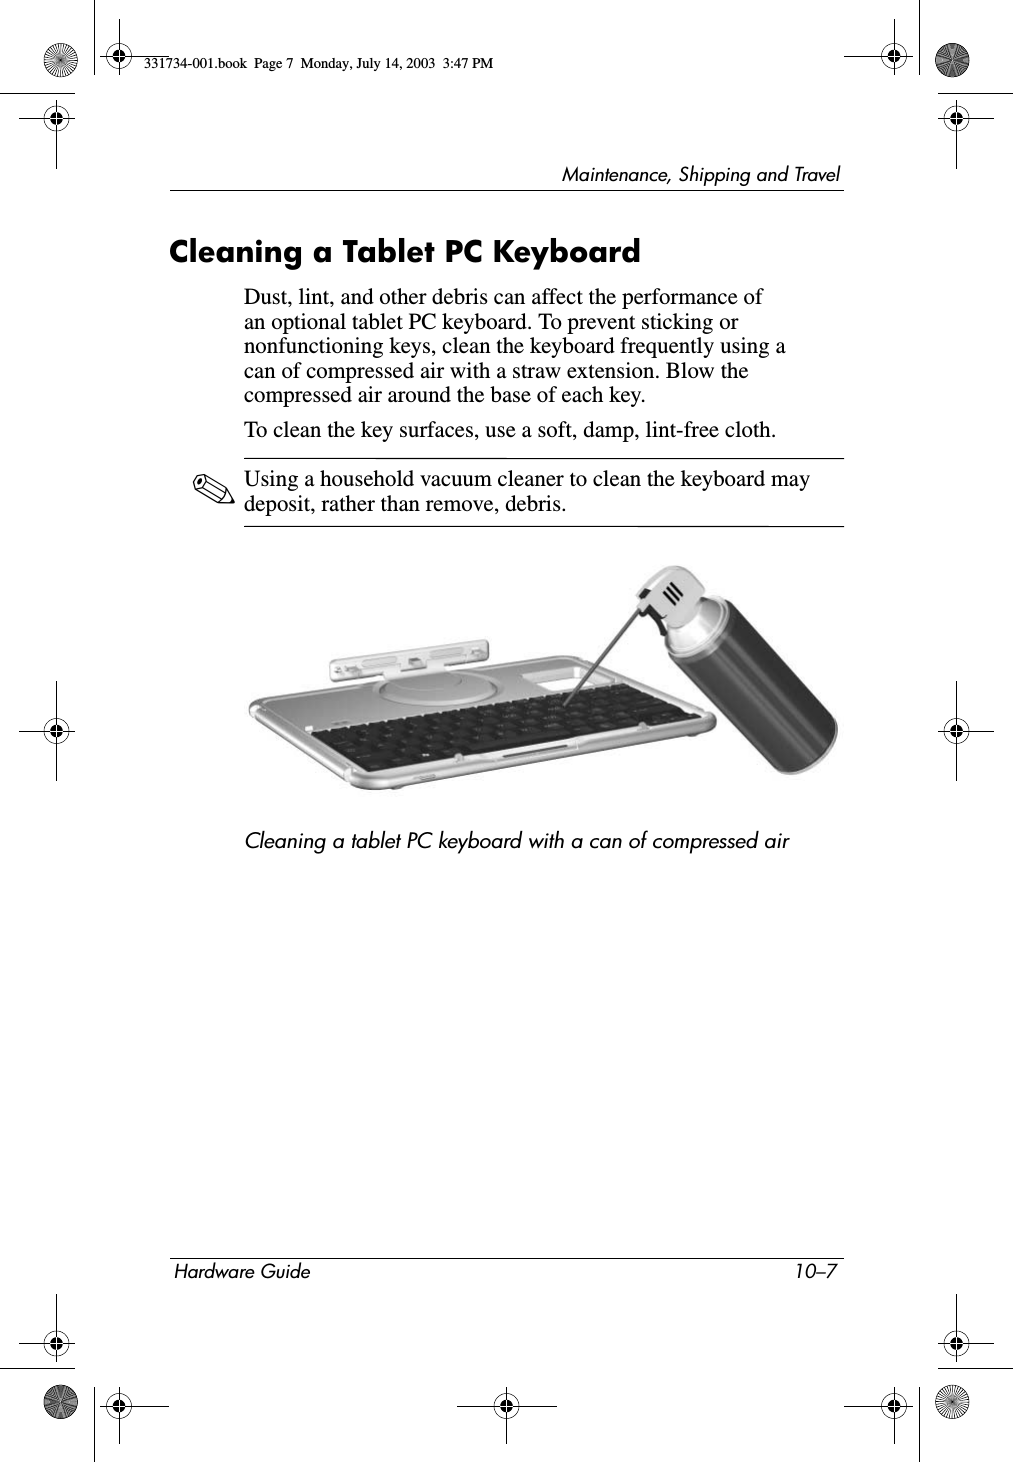 Maintenance, Shipping and TravelHardware Guide 10–7Cleaning a Tablet PC KeyboardDust, lint, and other debris can affect the performance of an optional tablet PC keyboard. To prevent sticking or nonfunctioning keys, clean the keyboard frequently using a can of compressed air with a straw extension. Blow the compressed air around the base of each key.To clean the key surfaces, use a soft, damp, lint-free cloth.✎Using a household vacuum cleaner to clean the keyboard may deposit, rather than remove, debris.Cleaning a tablet PC keyboard with a can of compressed air331734-001.book  Page 7  Monday, July 14, 2003  3:47 PM